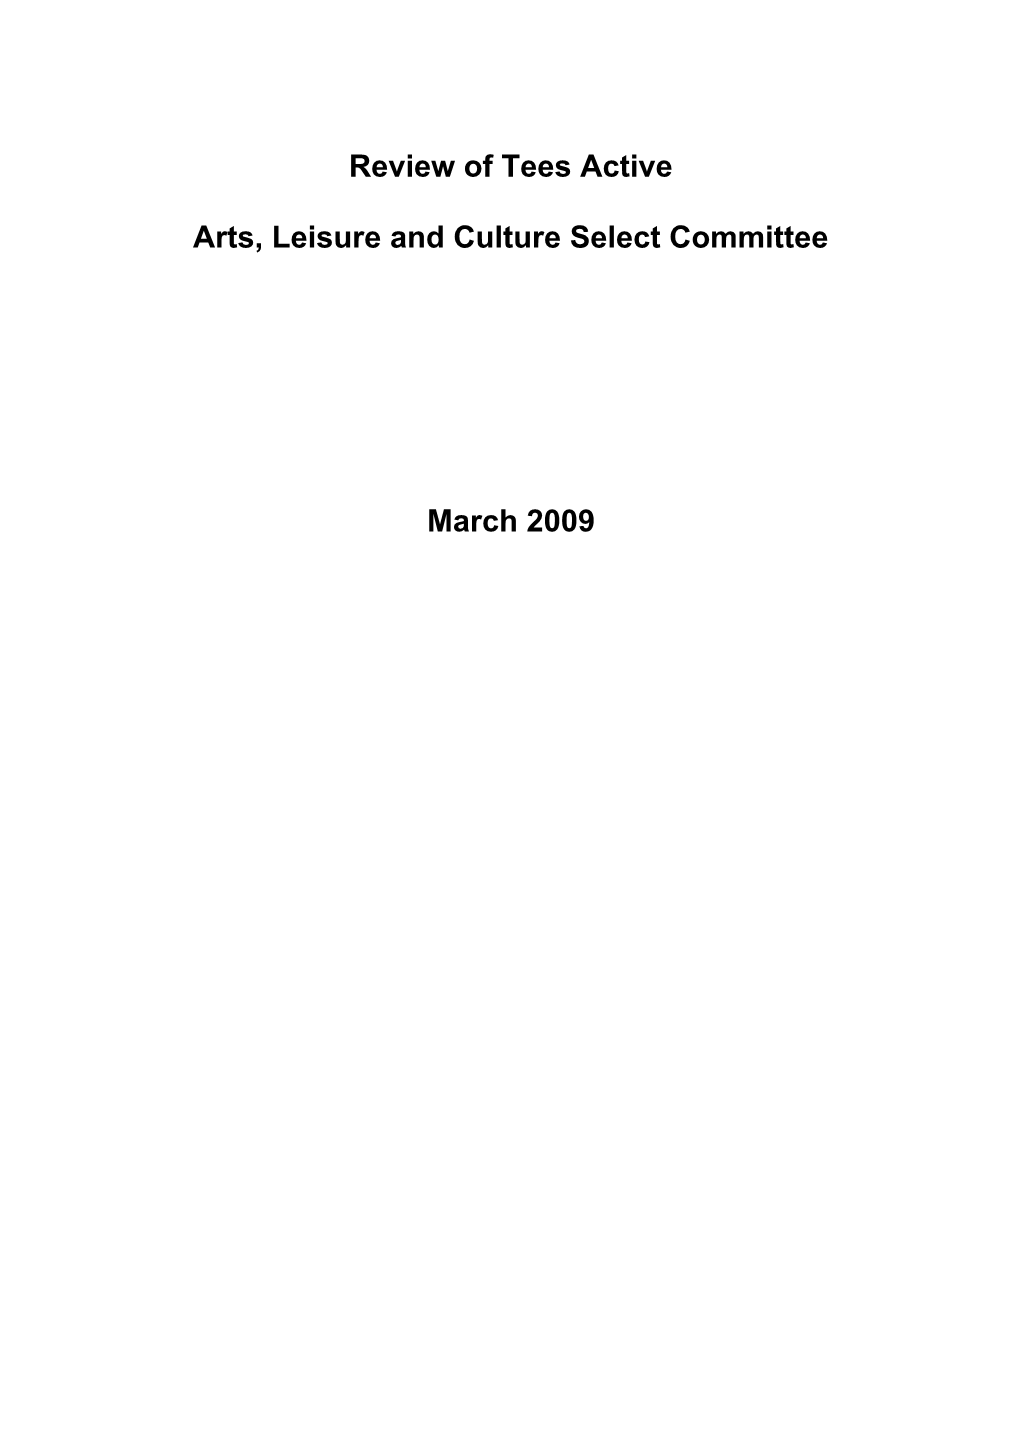 Arts, Leisure and Culture Select Committee